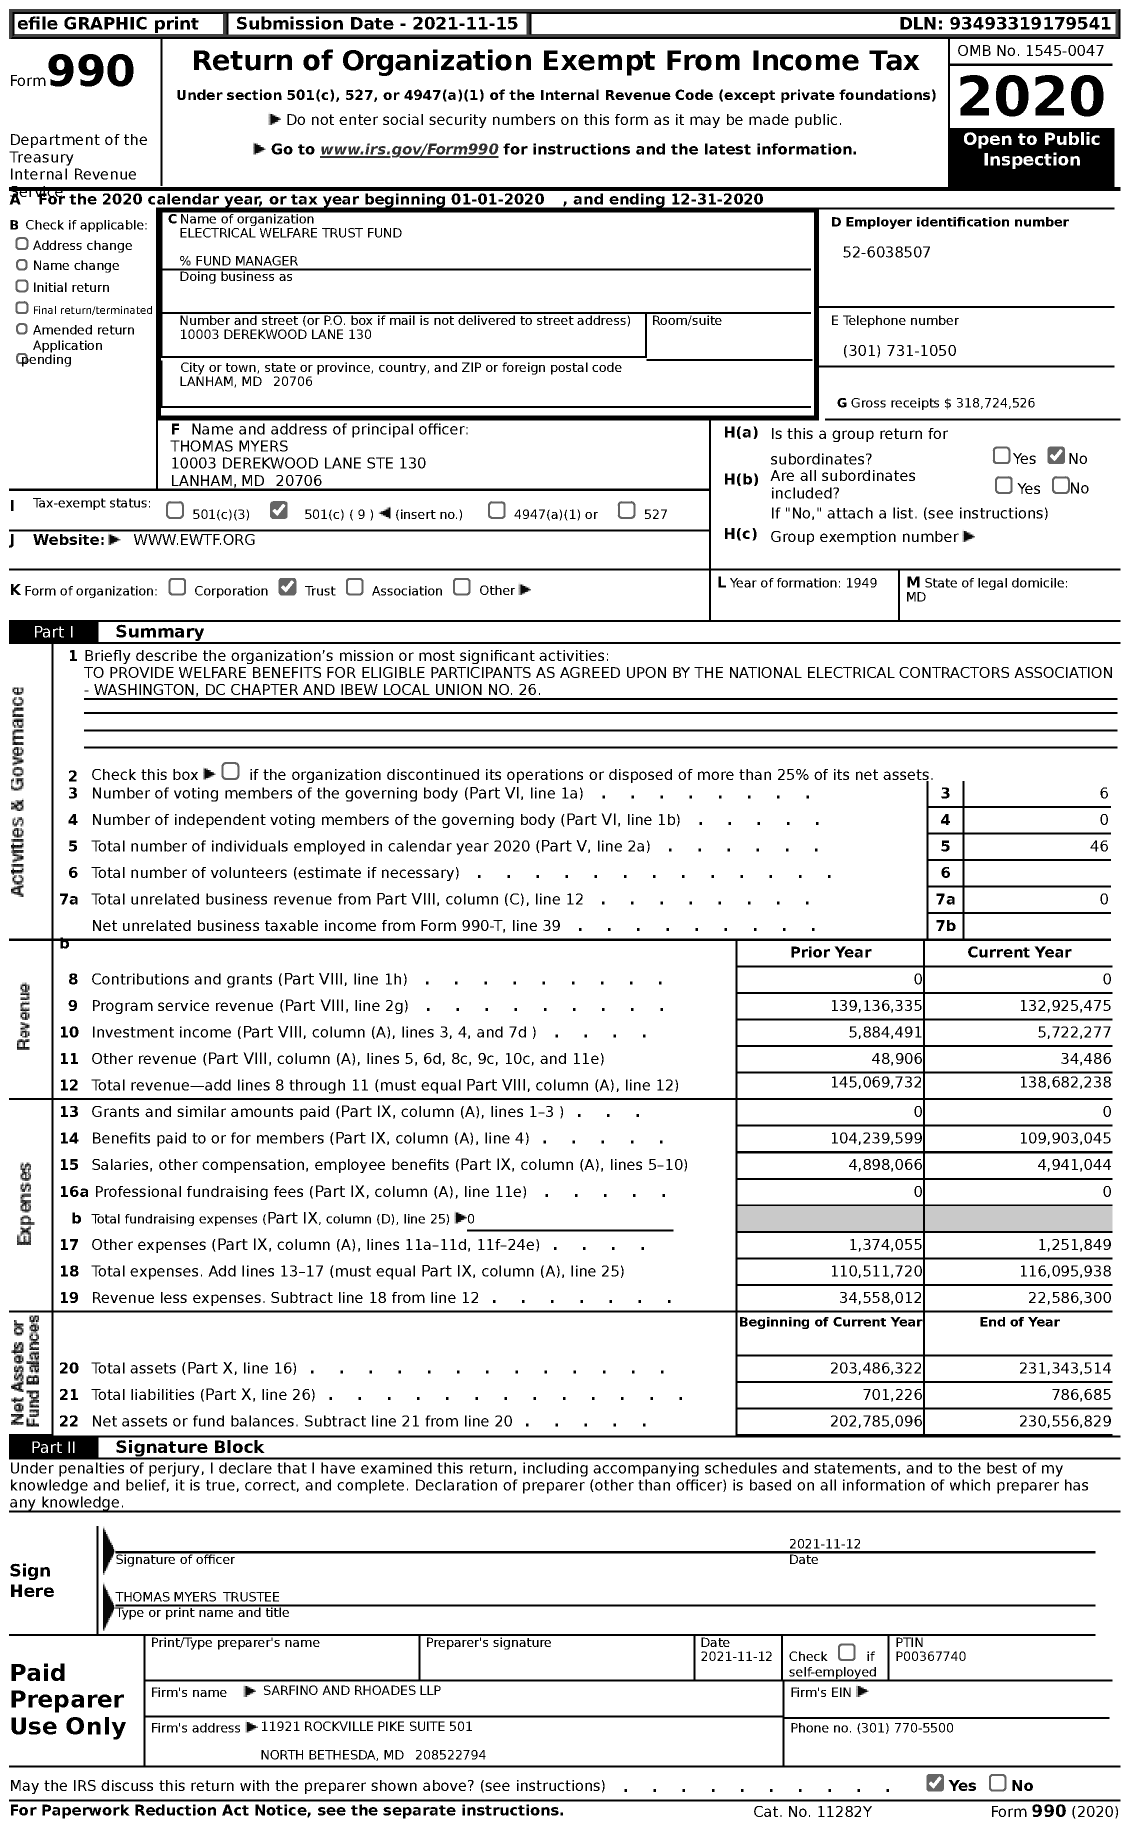 Image of first page of 2020 Form 990 for Electrical Welfare Trust Fund